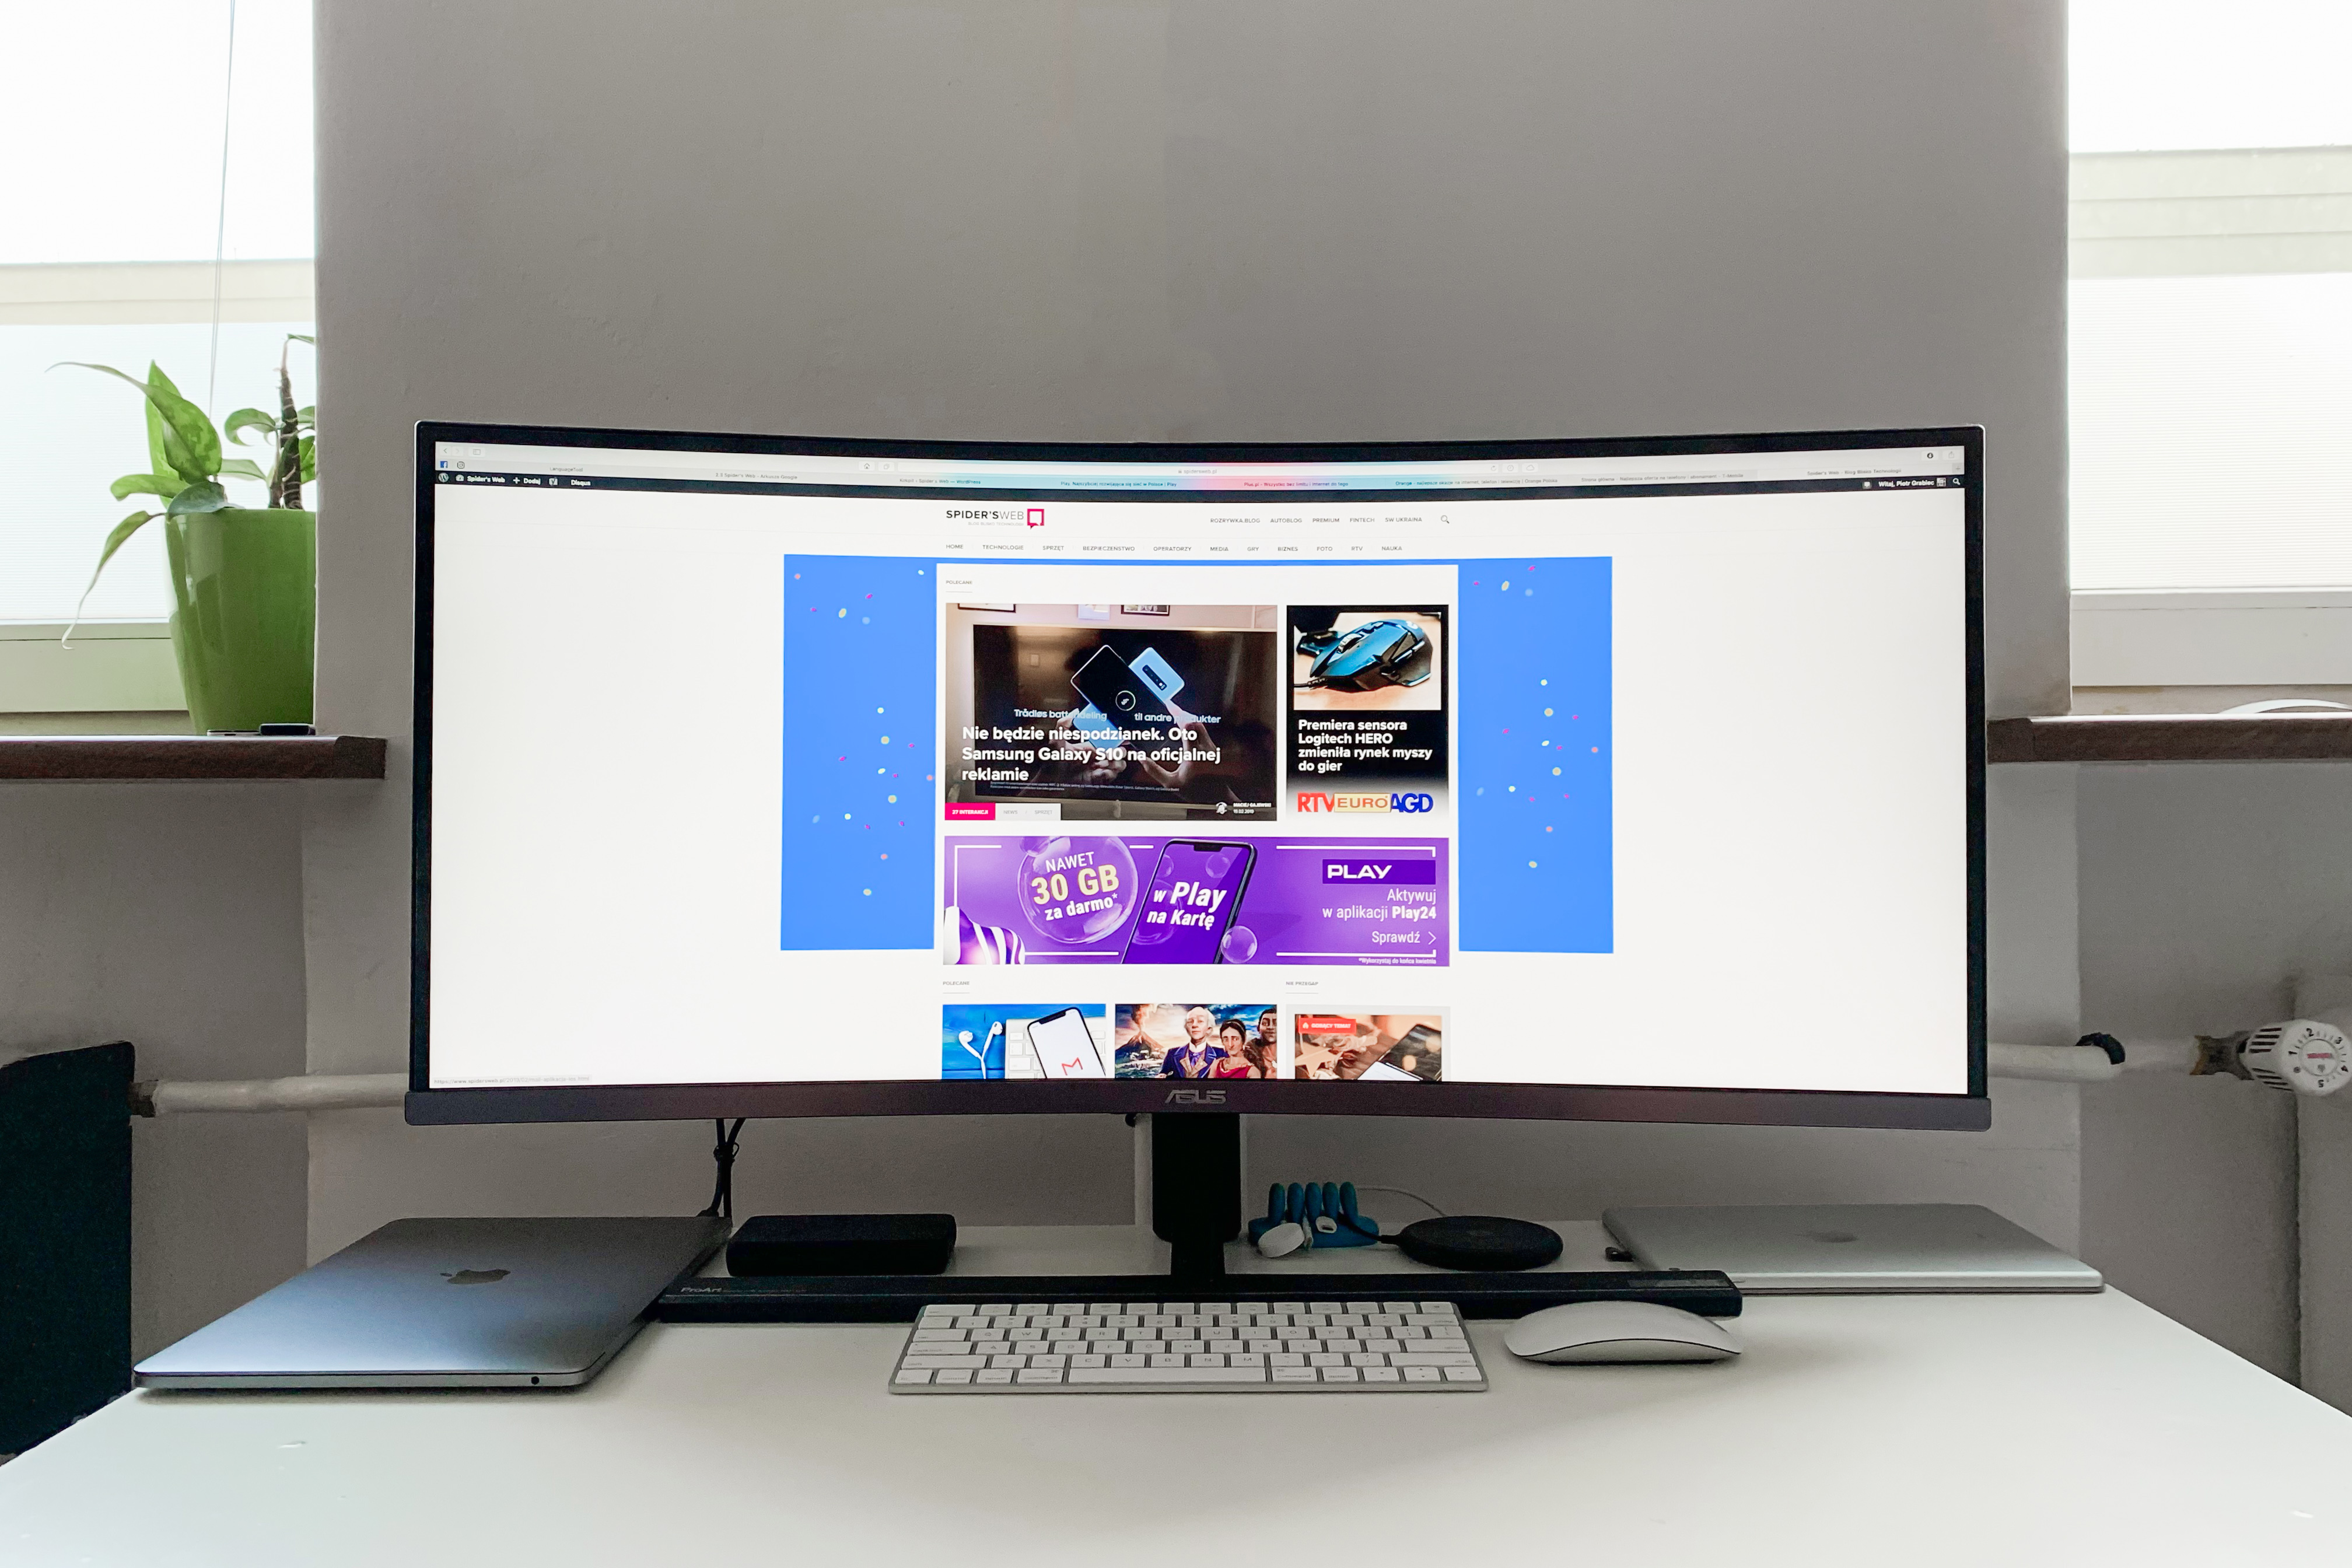 Asus ProArt PA34V is one of the few monitors for the MacBook that was